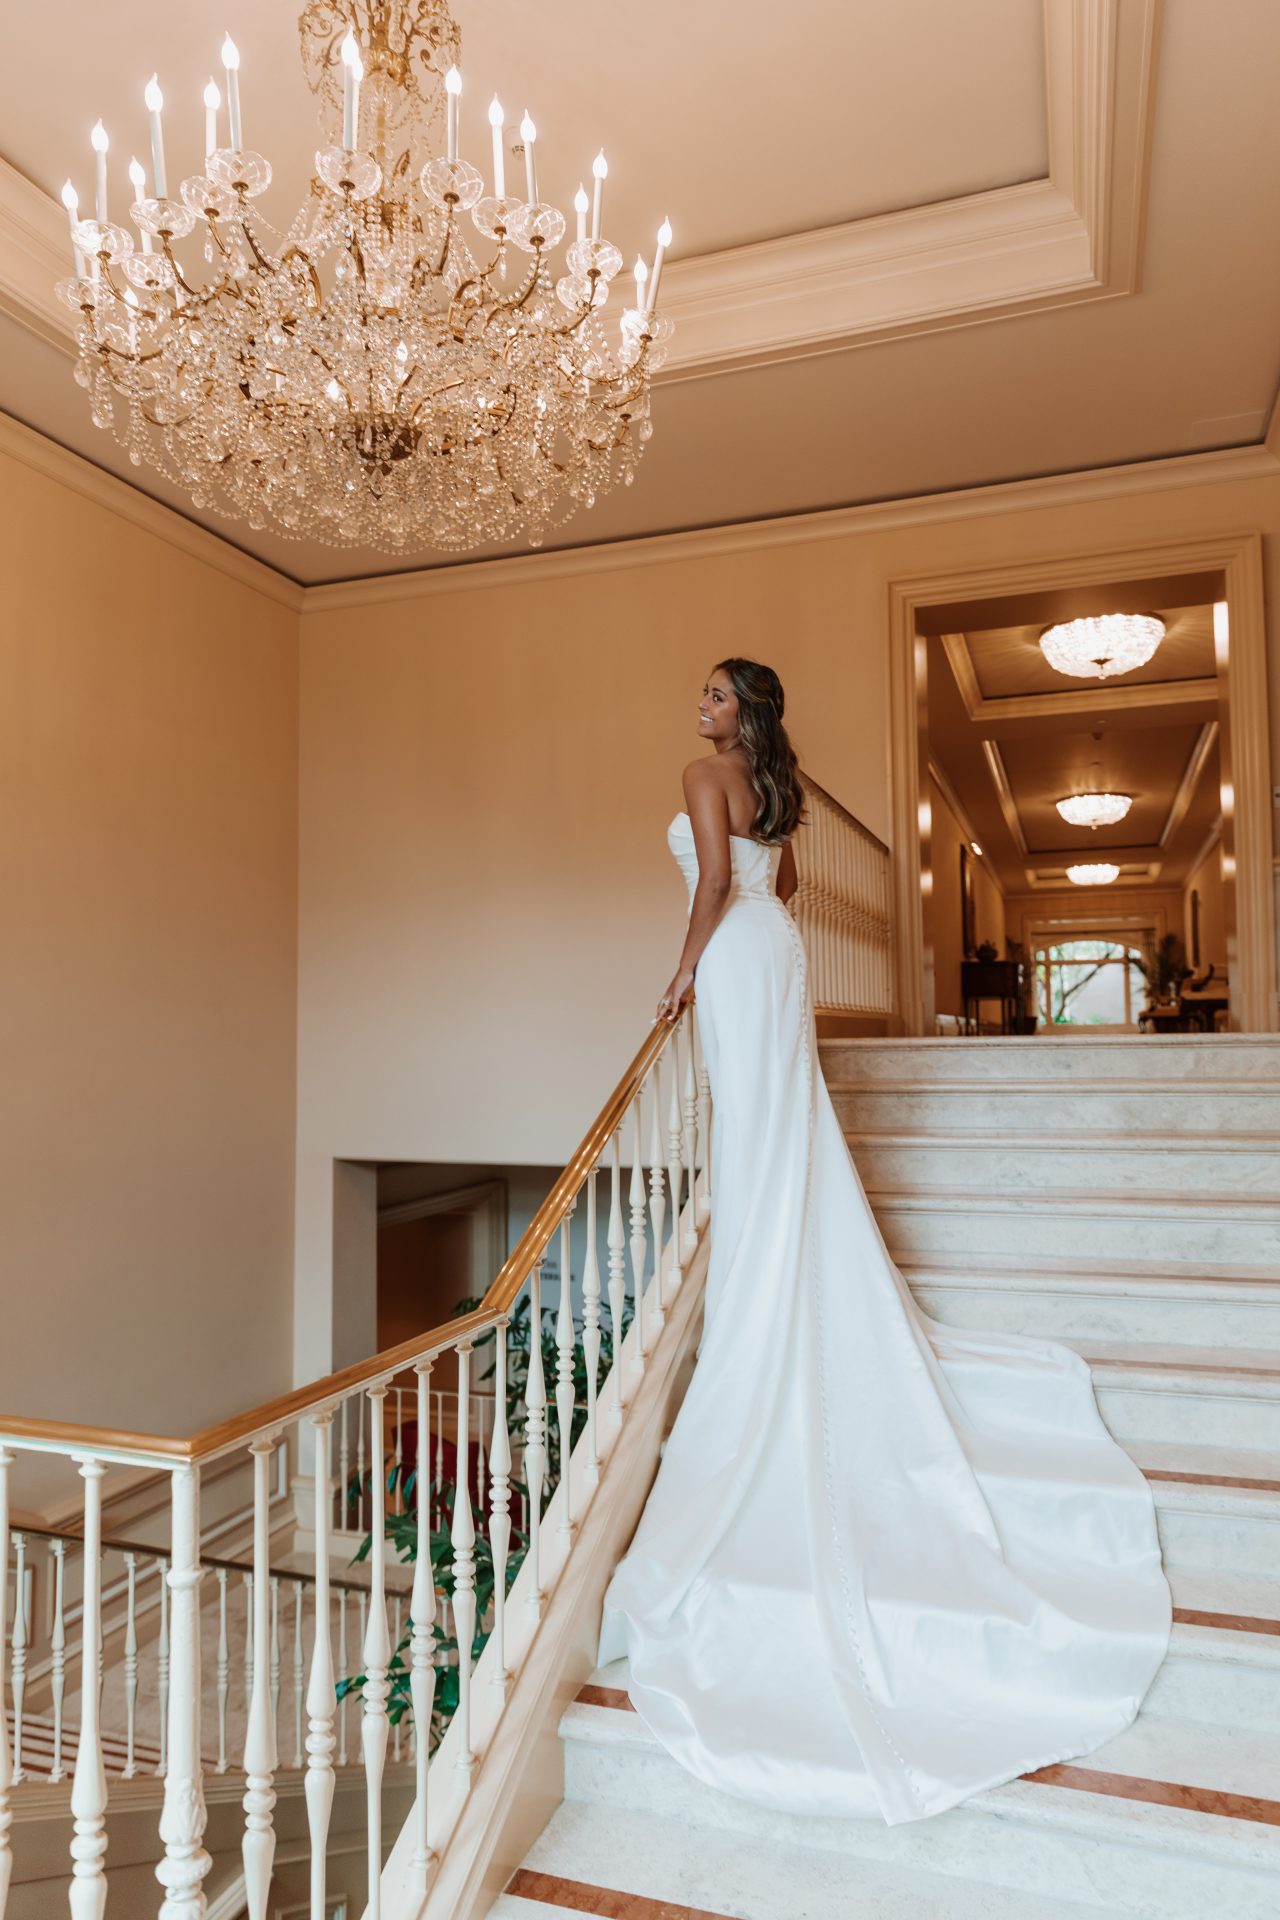 Essense of Australia D3705 plain satin fitted wedding dress on stairs showing train.